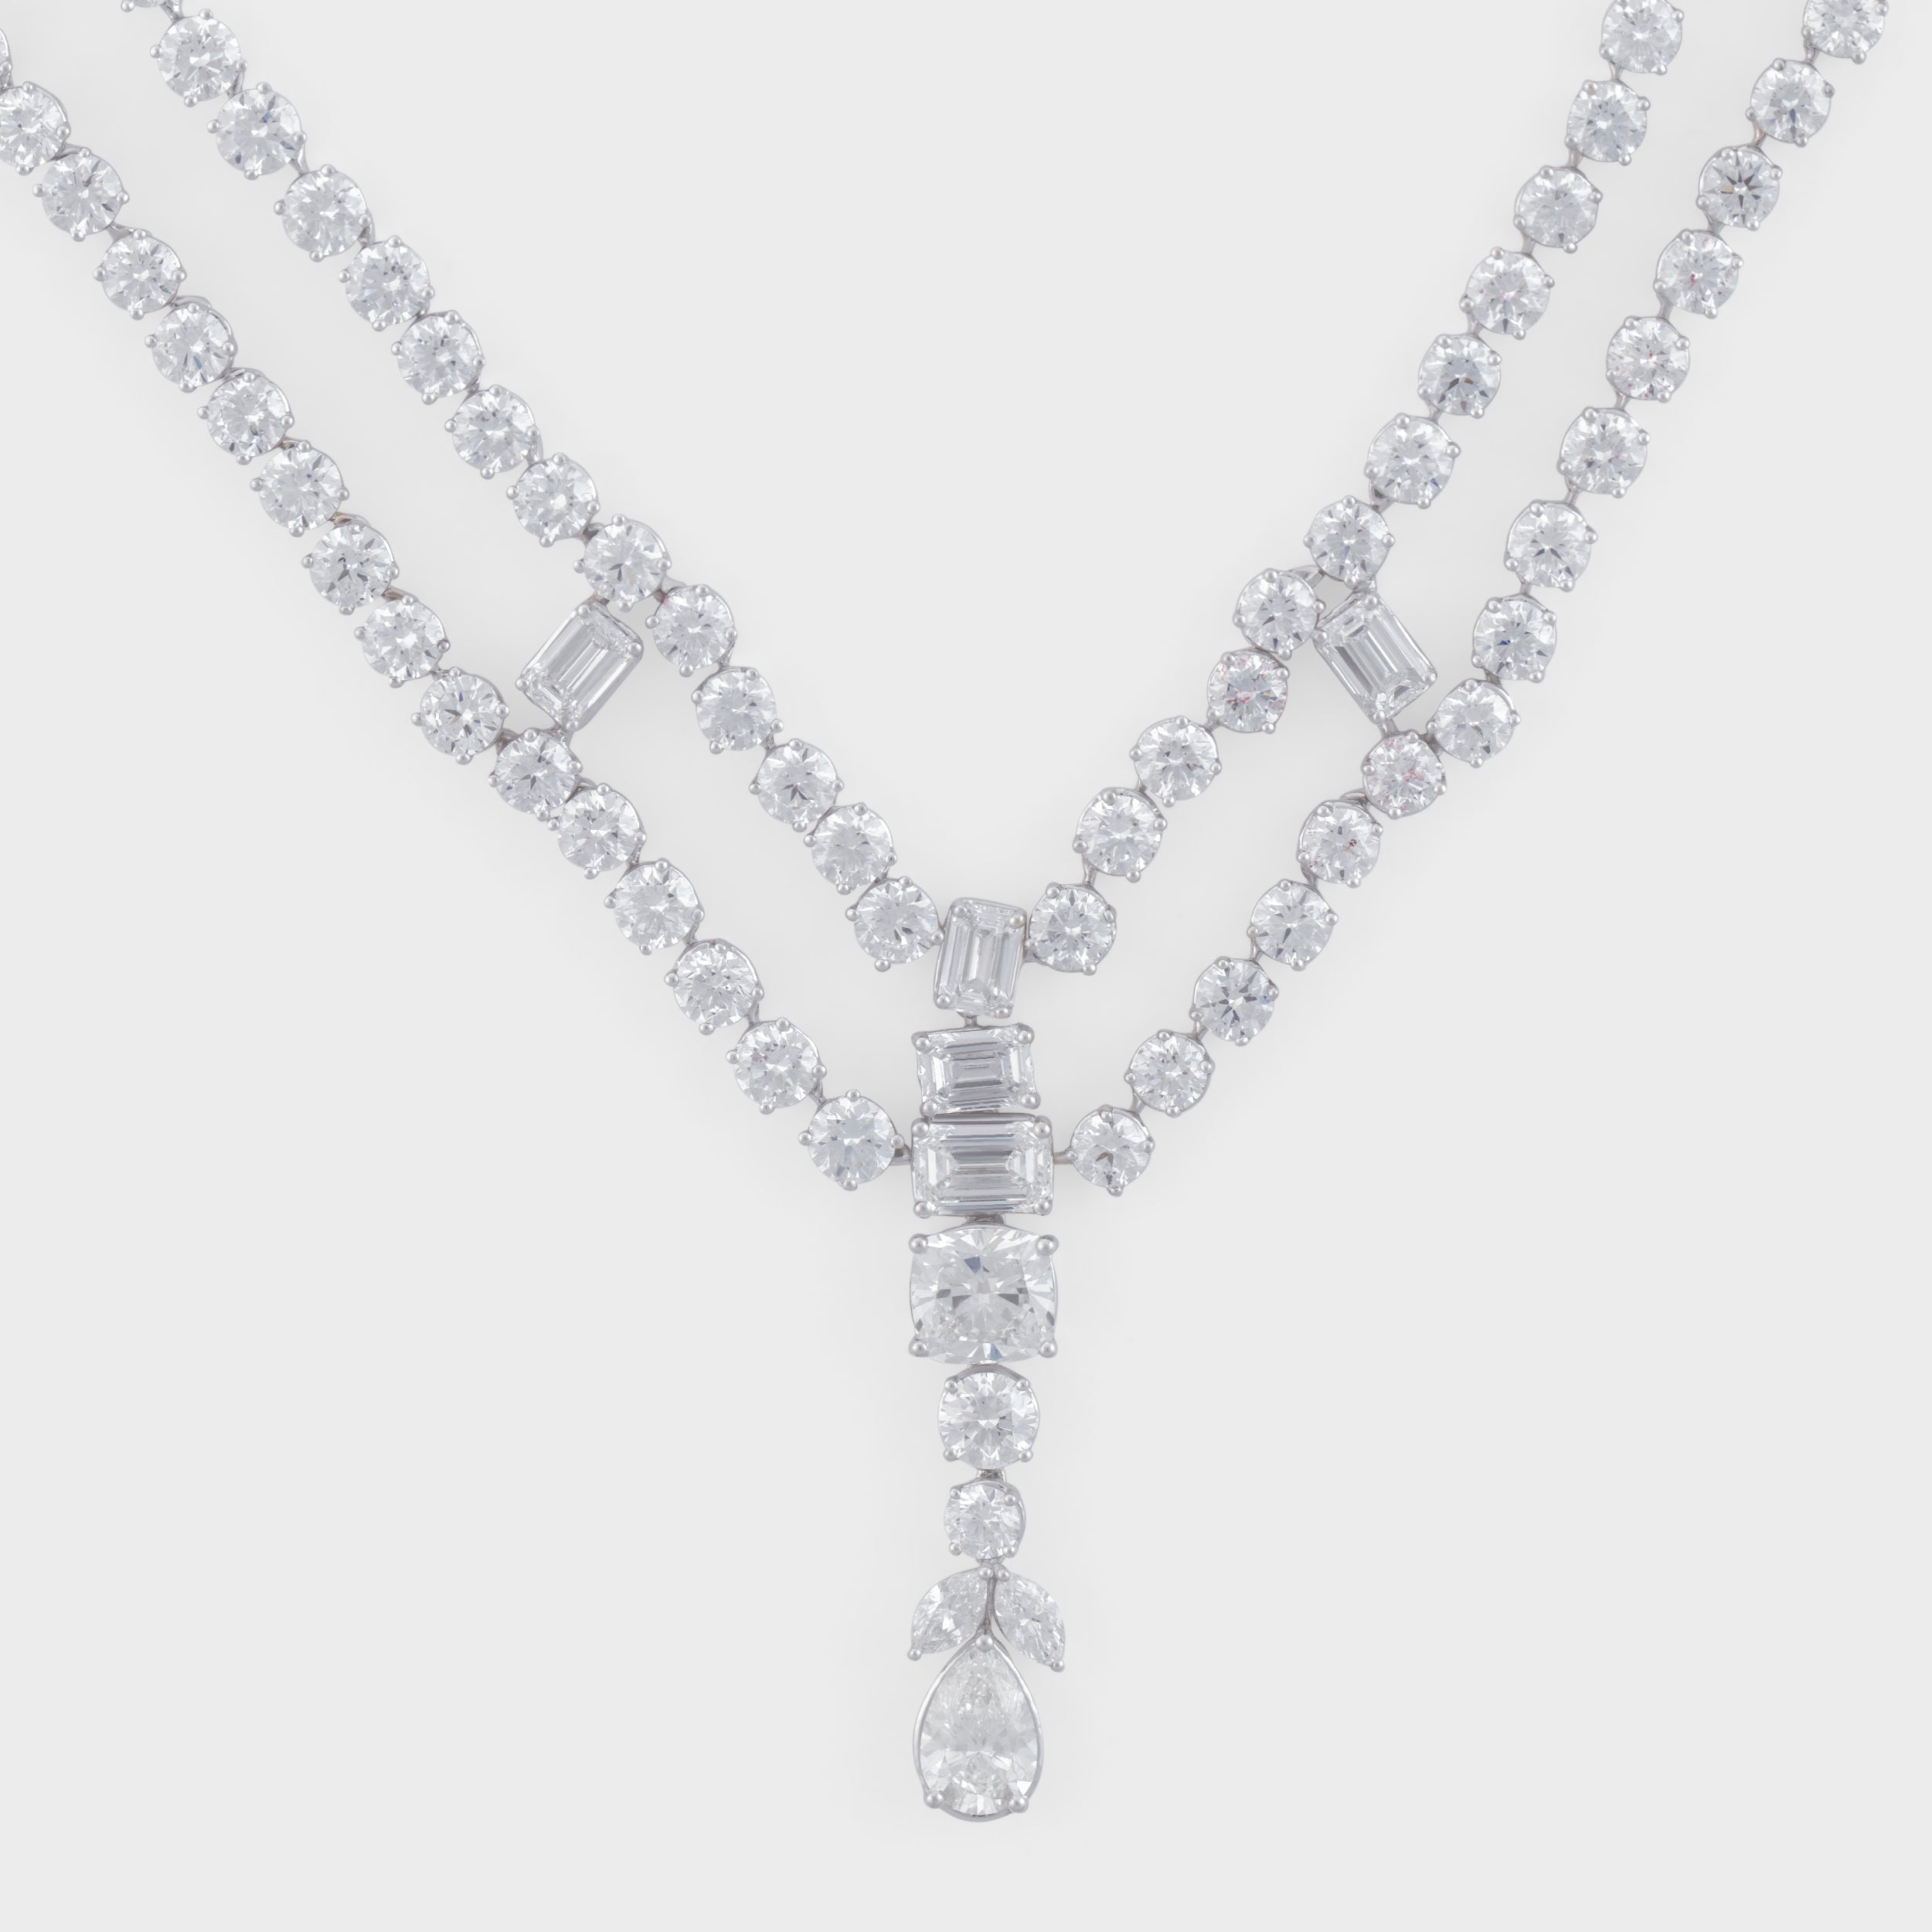 Timeless Splendor: Lab-Grown Solitaire Diamond Necklace in White Gold | SKU : 0019515939